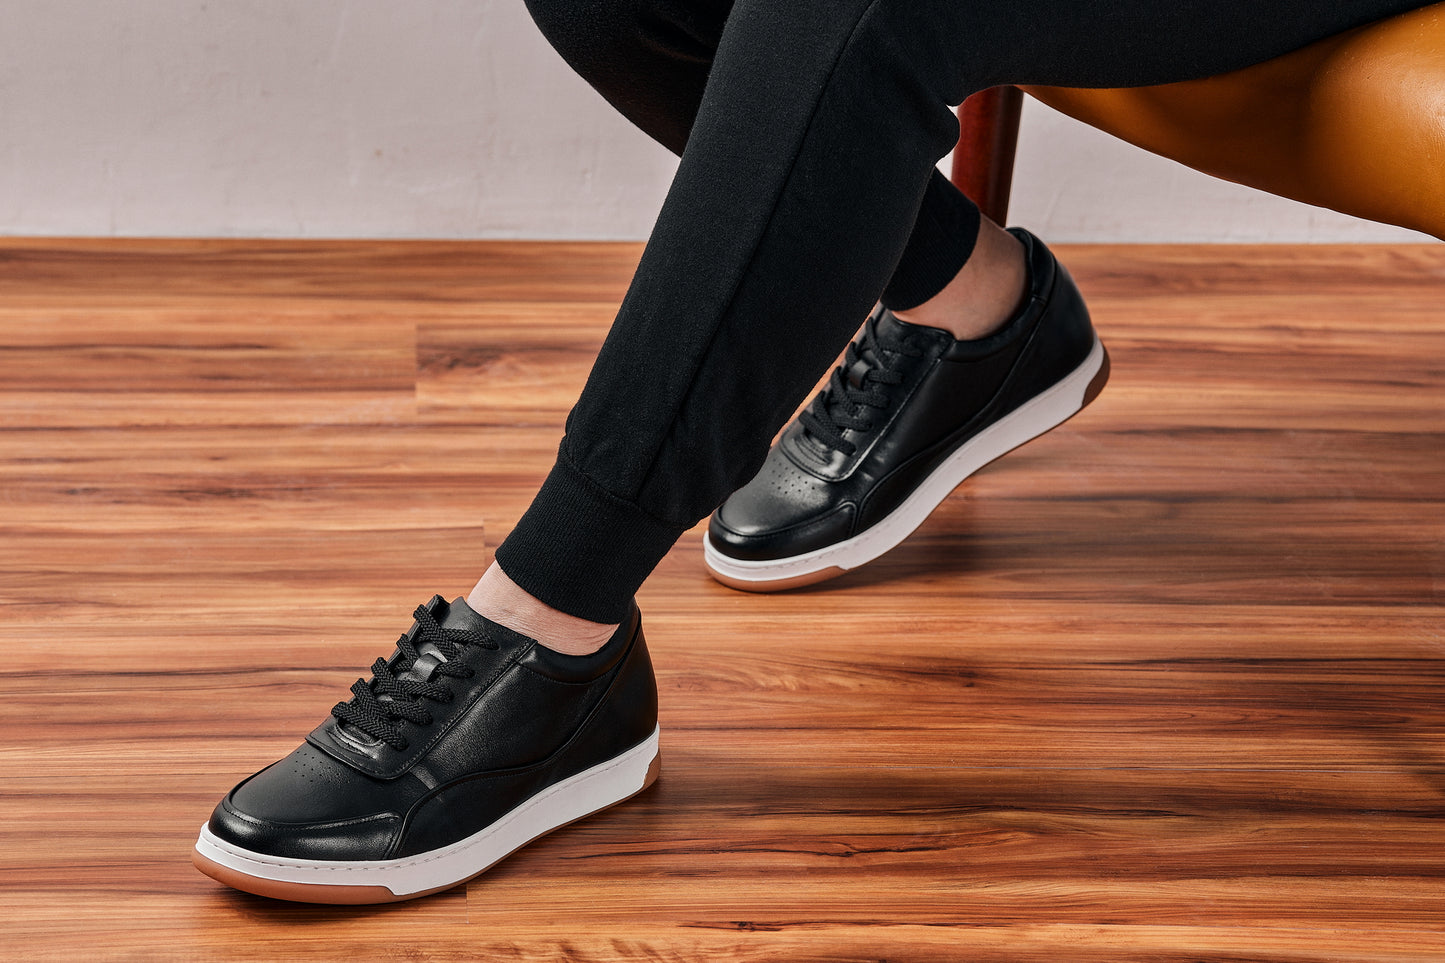 CALTO - Y7885 - 2.6 Inches Taller (Black/White & Gum Sole) - Elevated Leather Sneakers